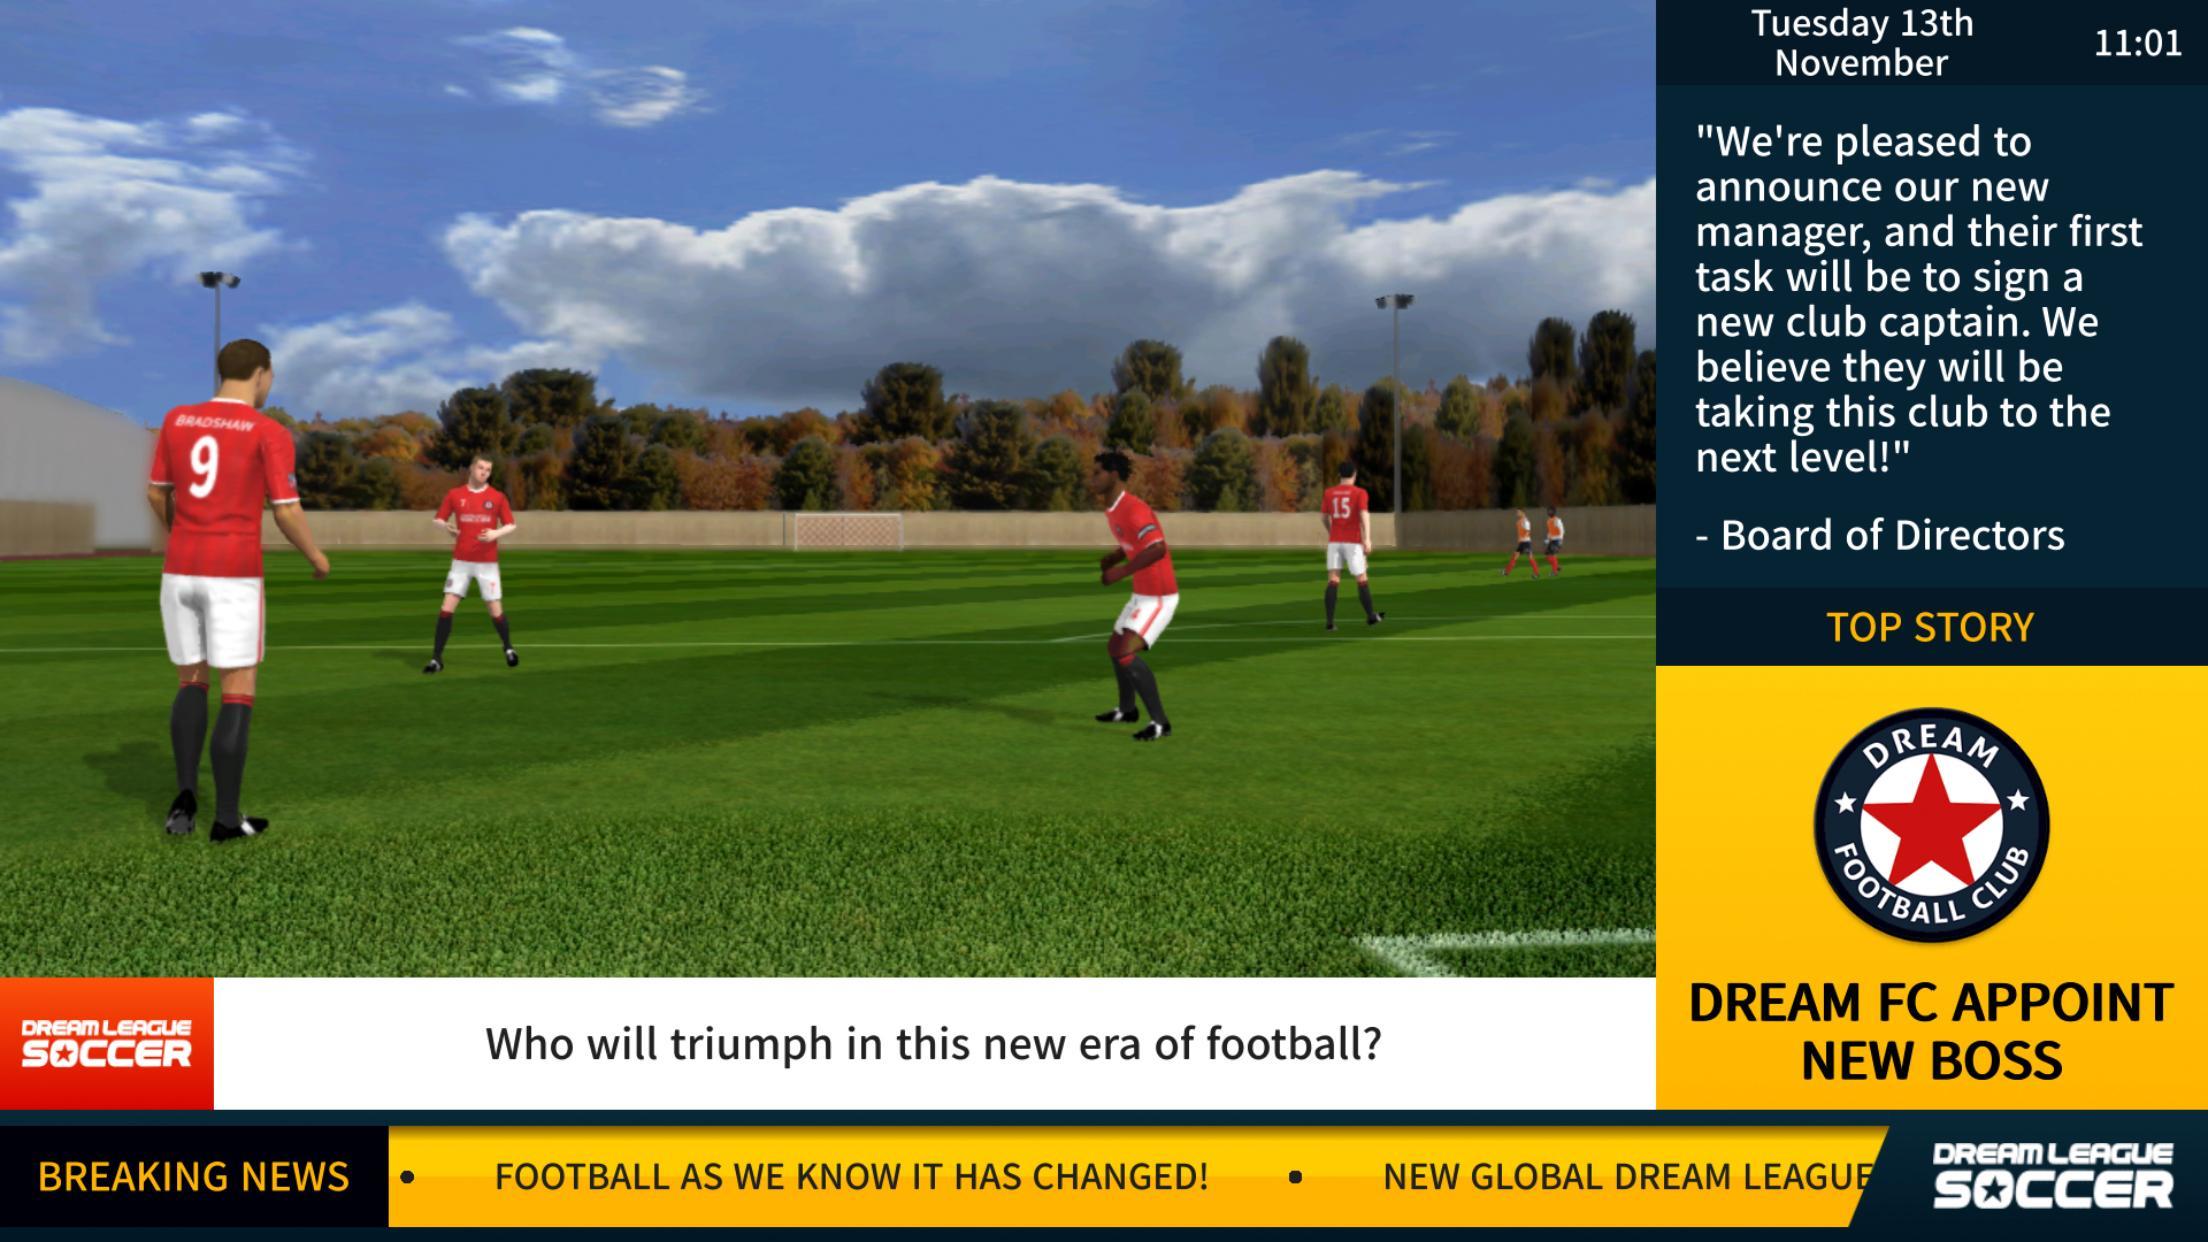 Hey Dream League Soccer fans, have you updated to get all the new